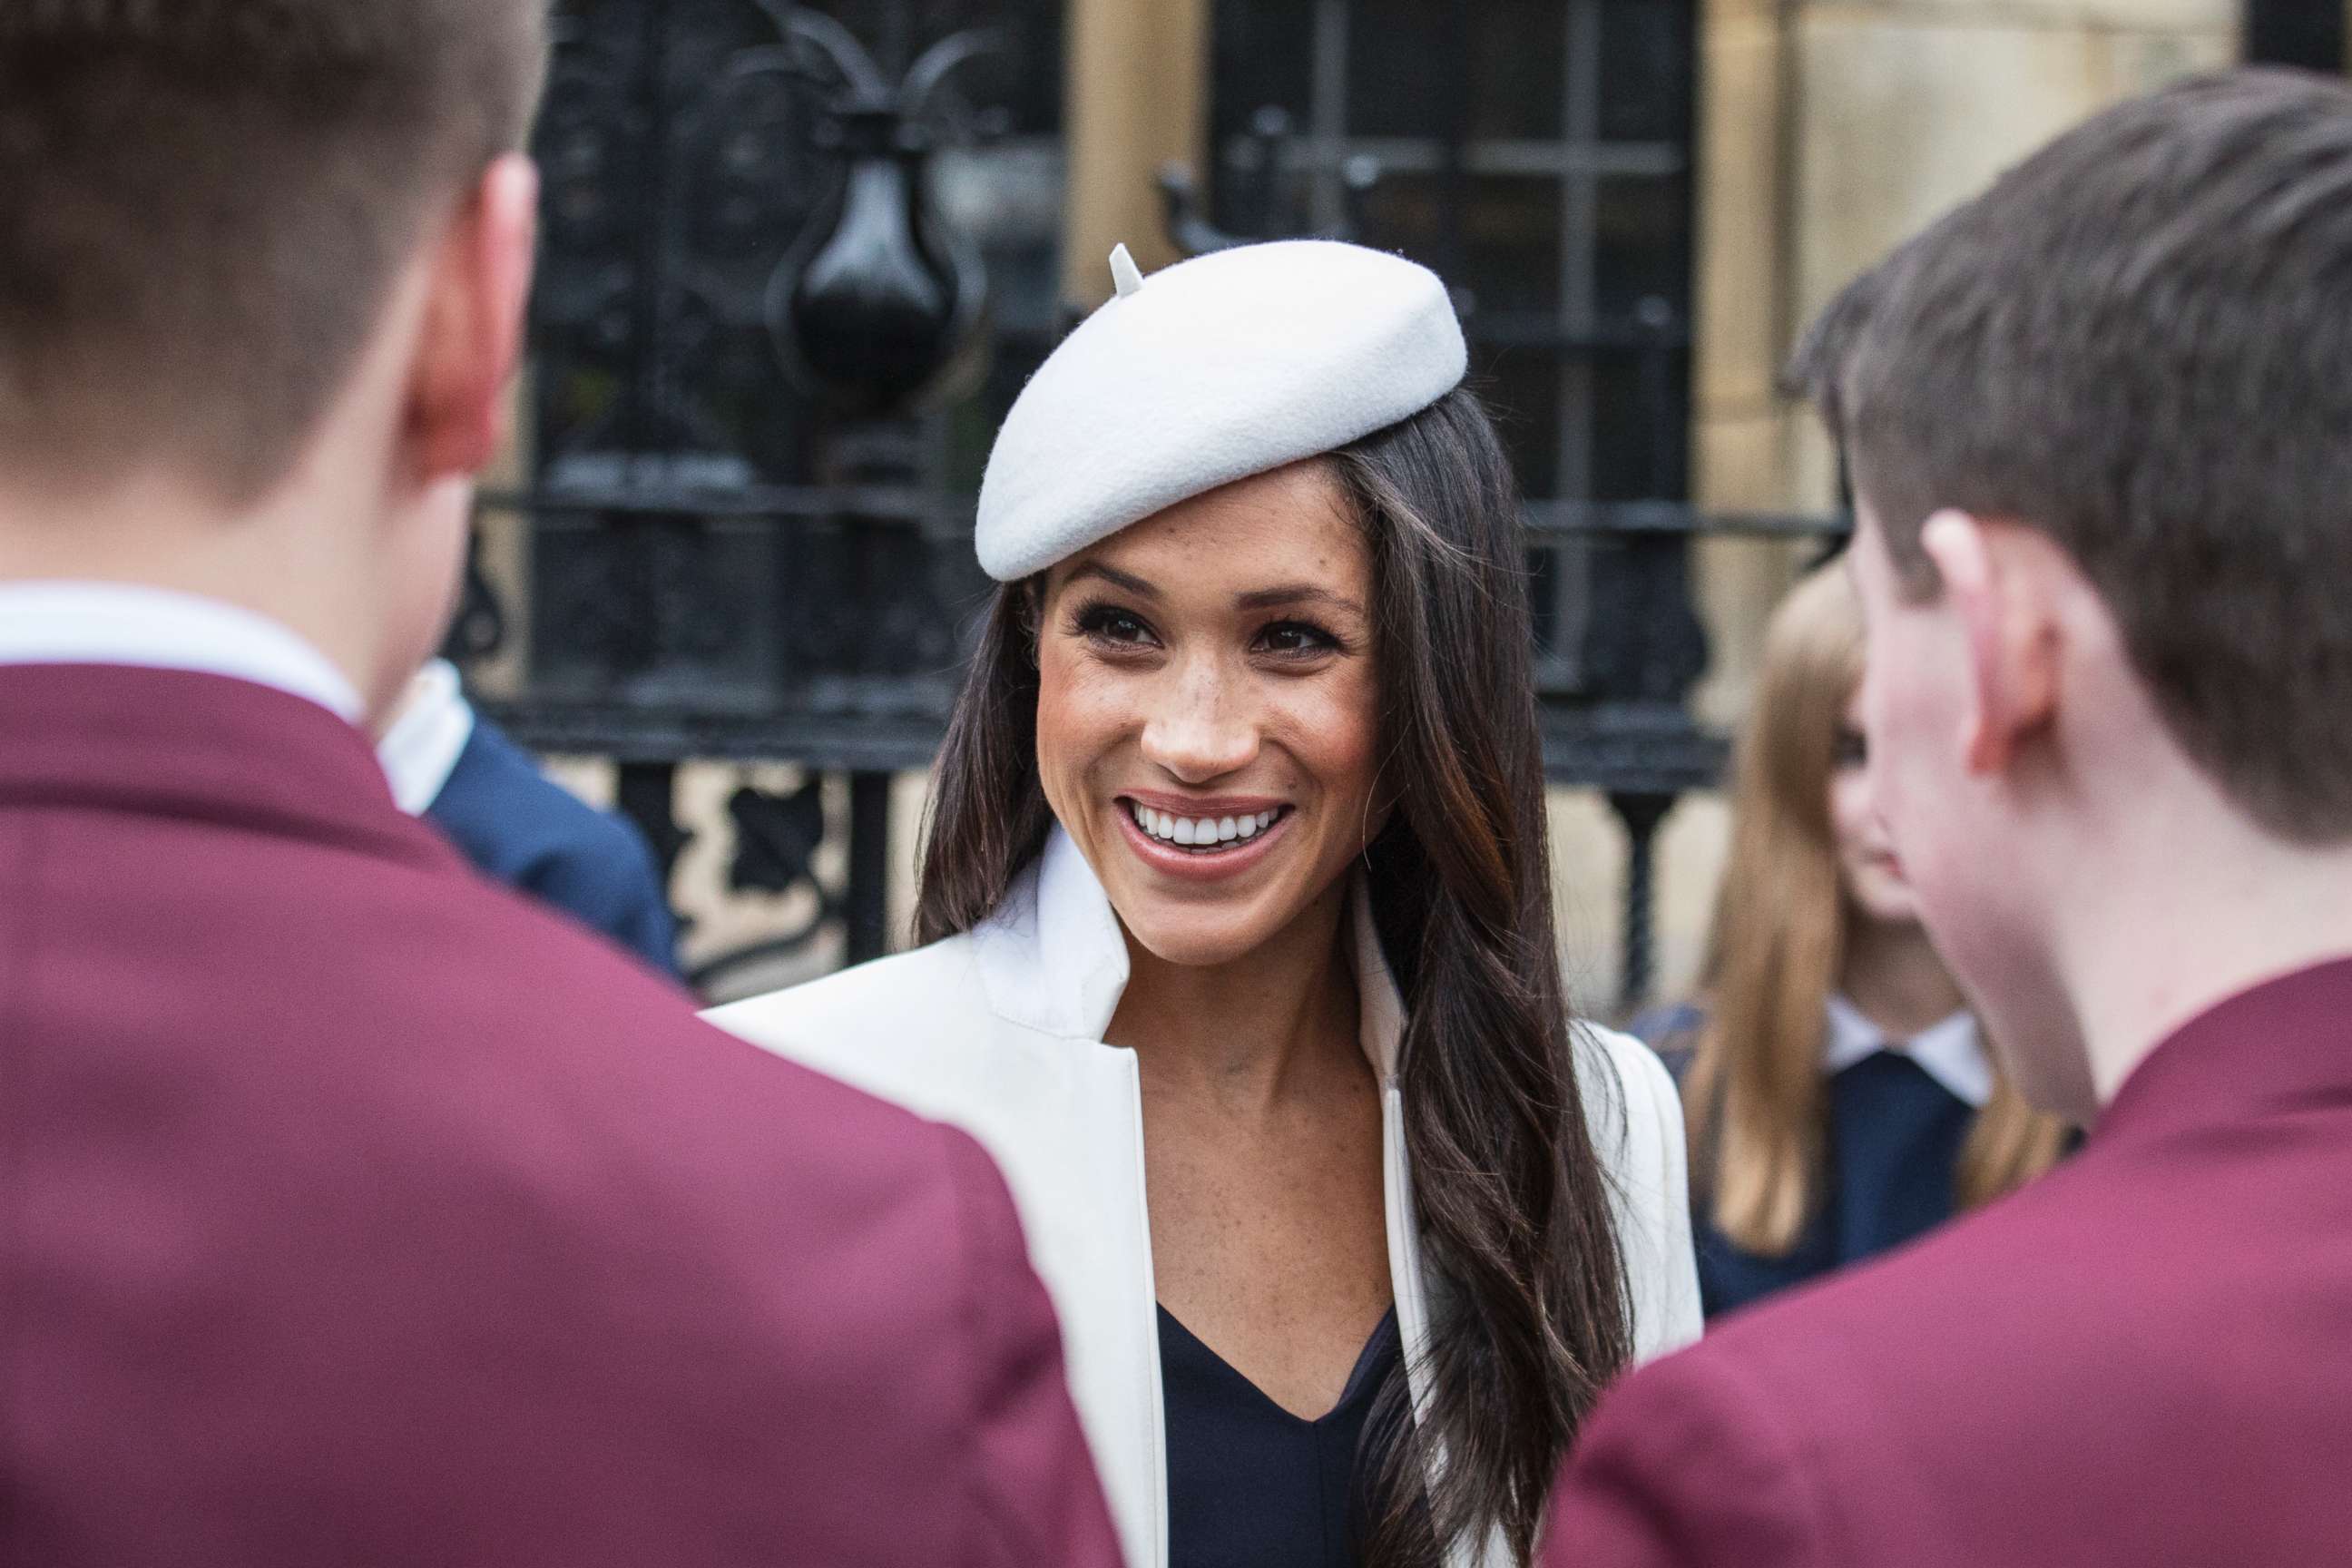 PHOTO: Meghan Markle meets well-wishers in the Dean's yard, after the Commonwealth Service at Westminster Abbey in London, March 12, 2018.  